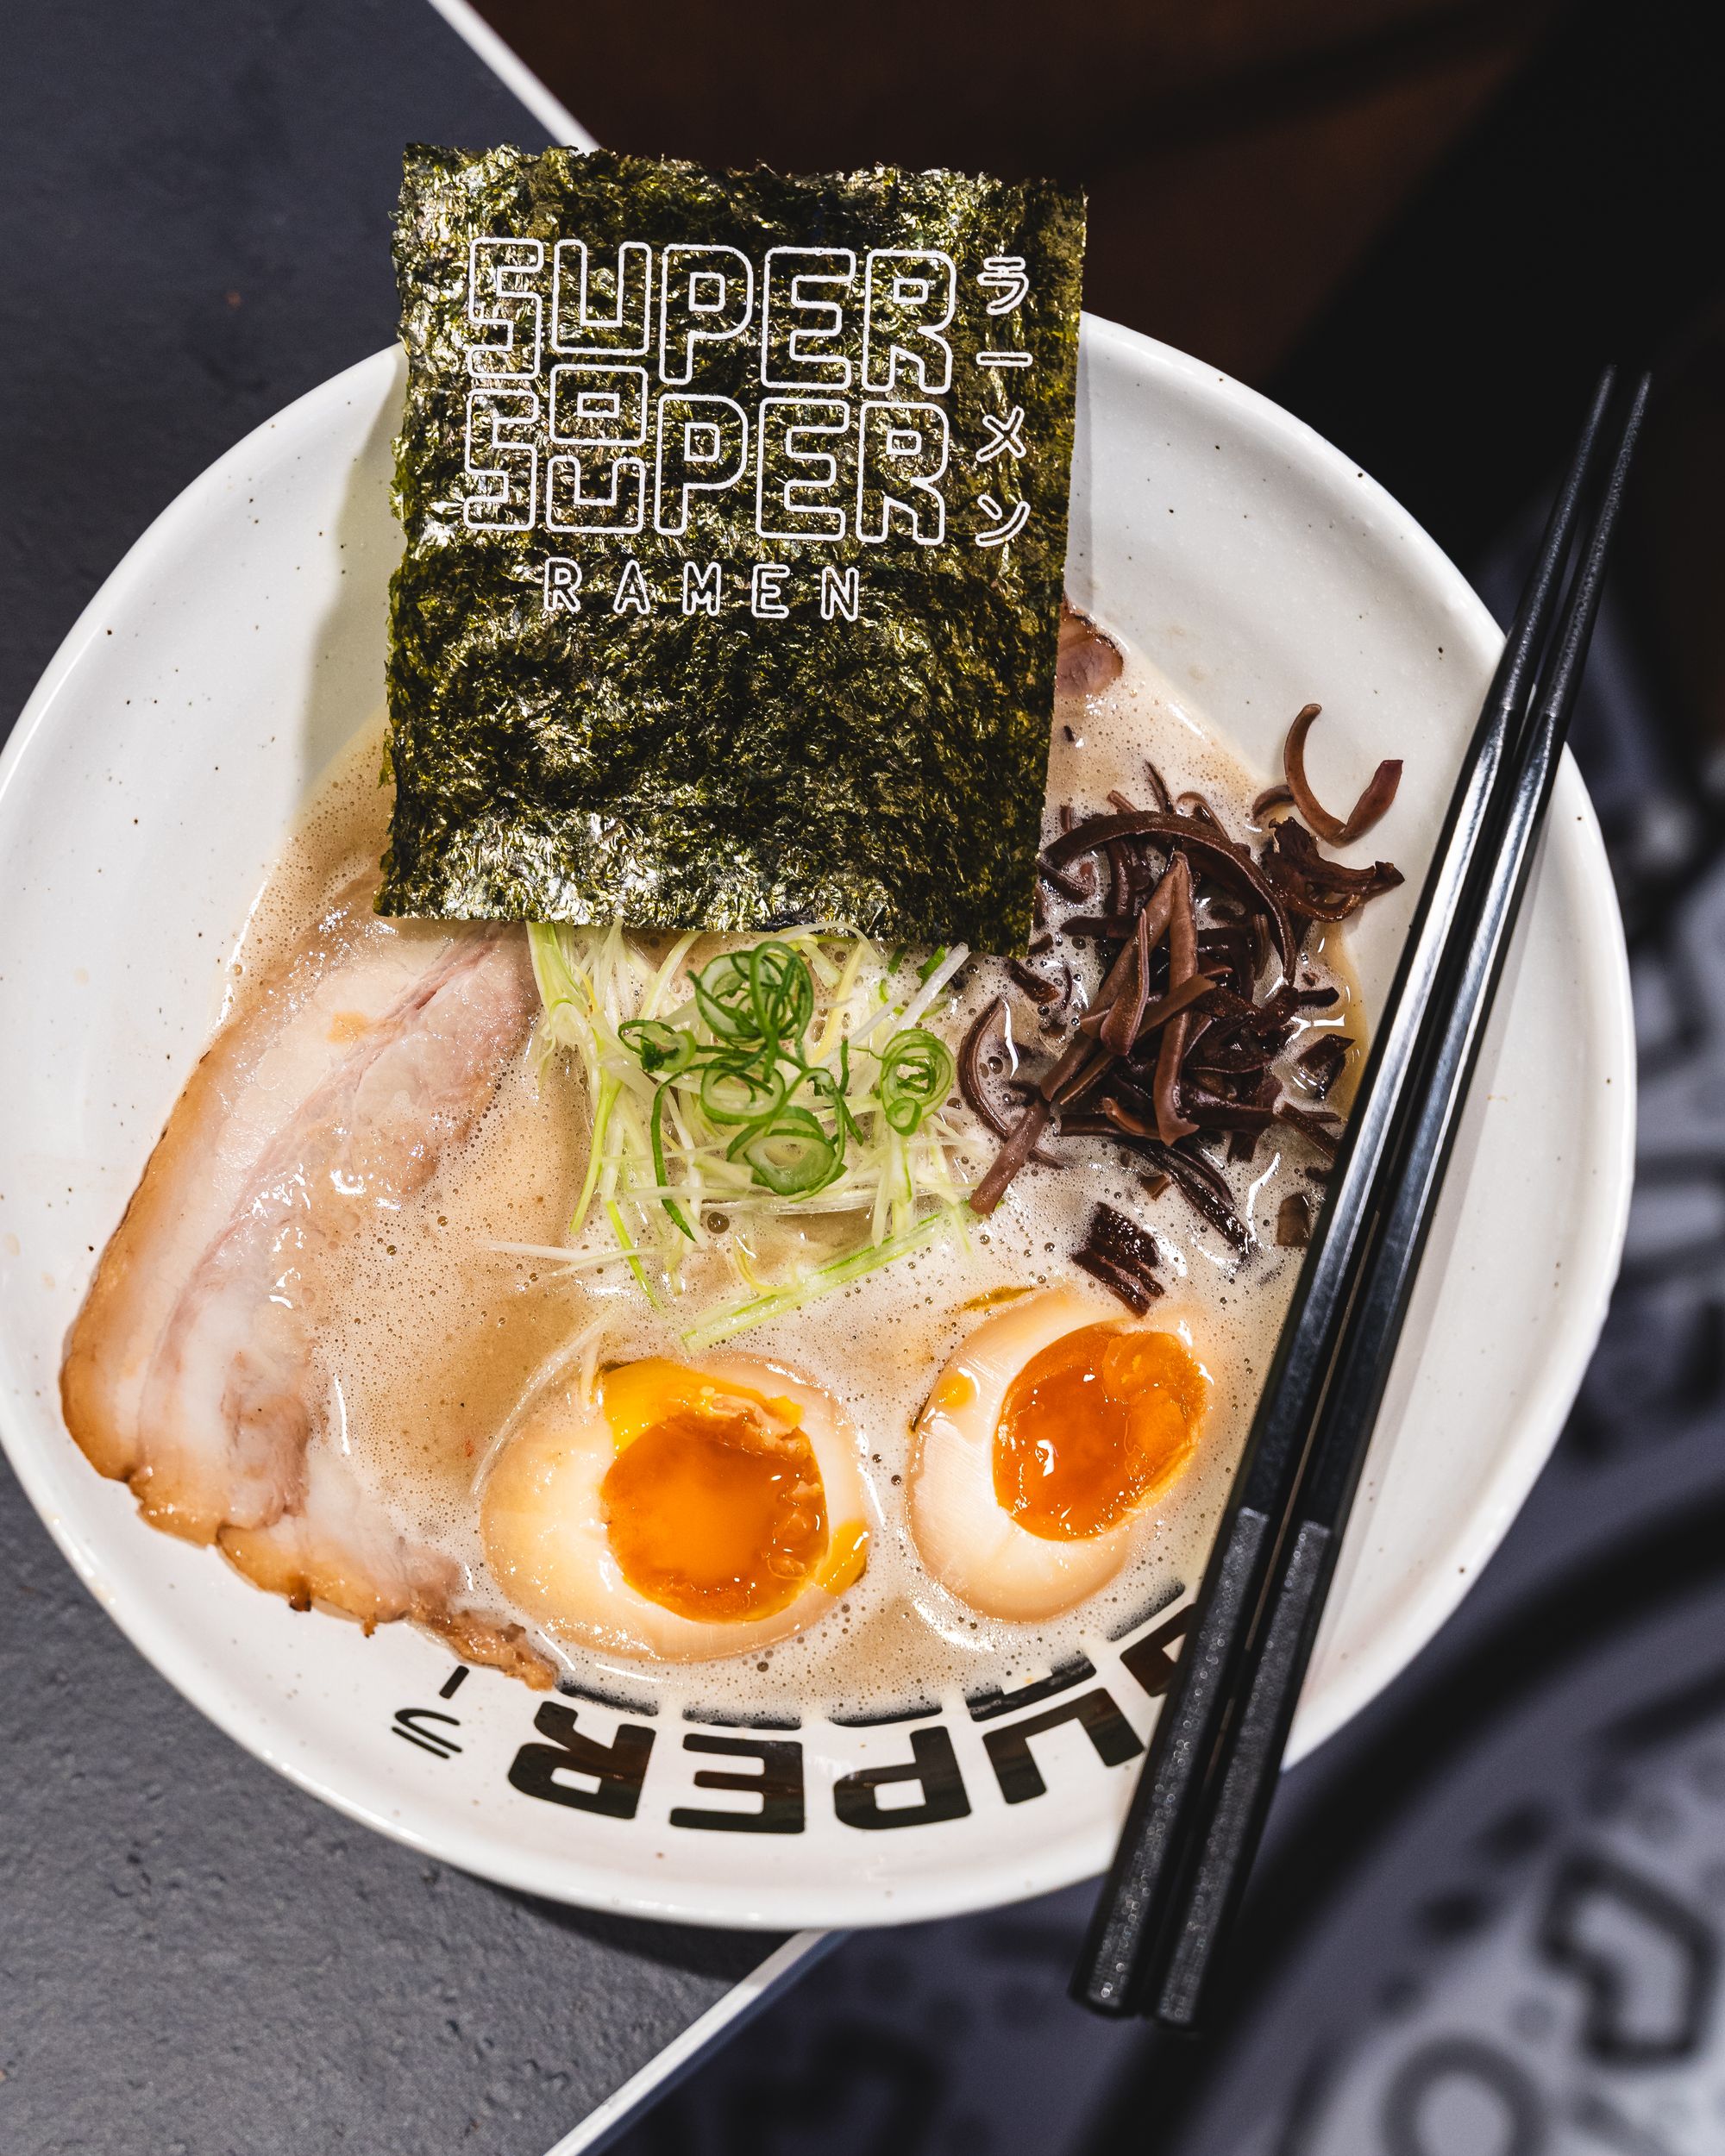 Top down shot of ramen with chashu, egg, seaweed, nori and chopsticks resting on the bowl